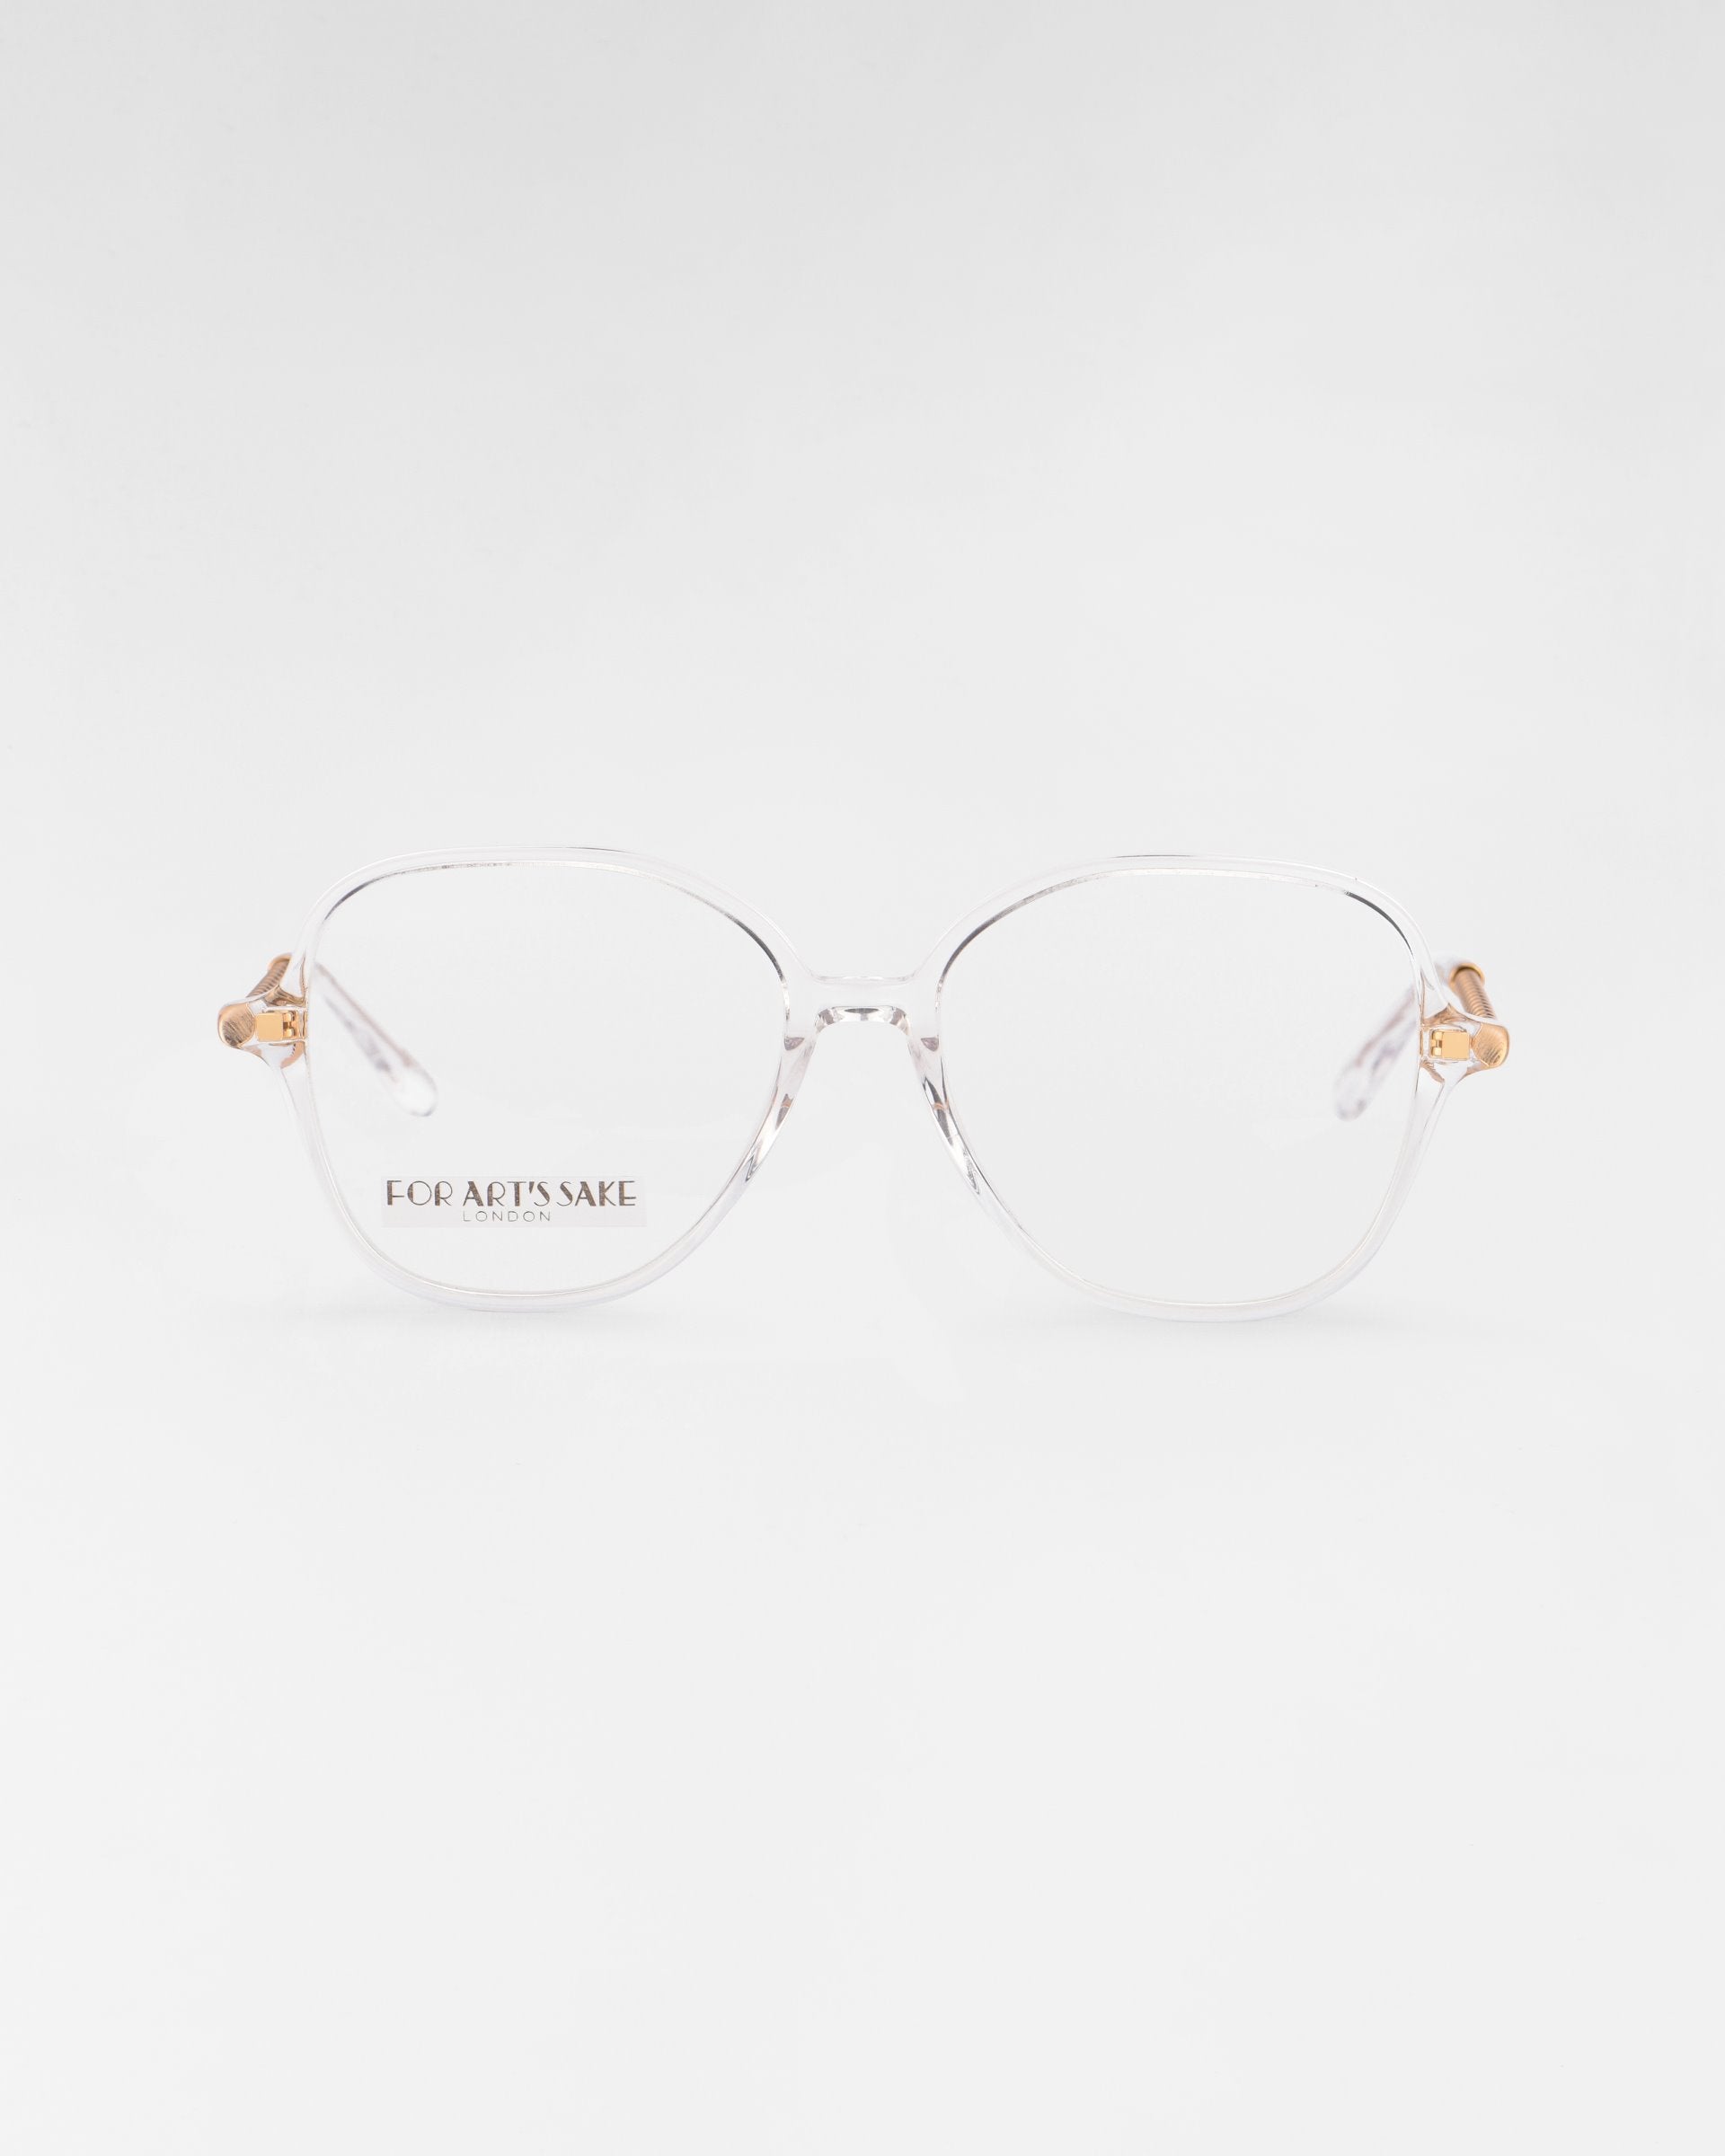 A pair of transparent eyeglasses with a slight hexagonal shape and gold accents on the temples, featuring a blue light filter for added eye comfort. The Dumpling glasses are displayed against a plain white background, with the brand For Art&#39;s Sake® visible on the left lens.